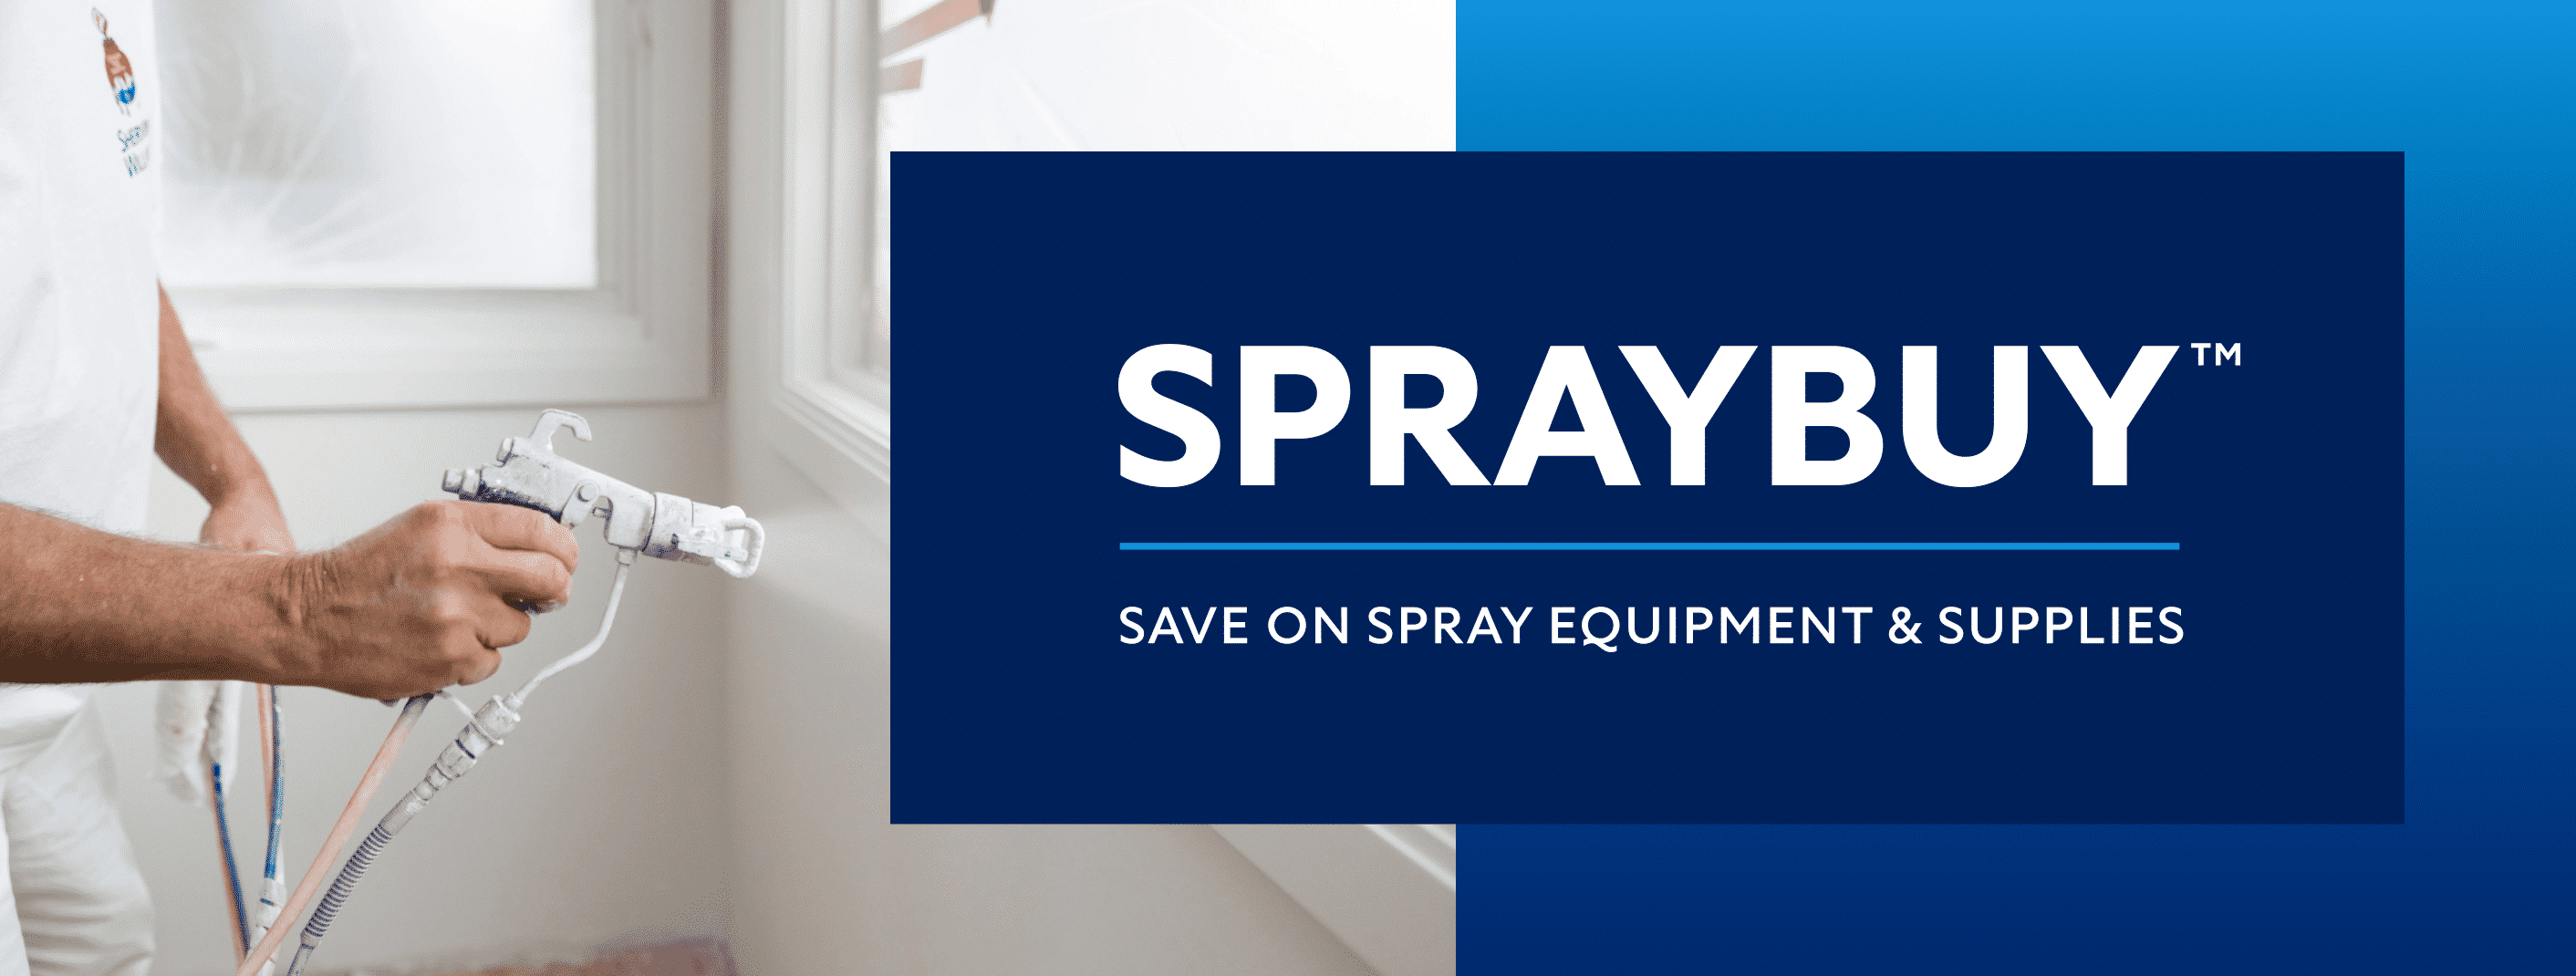 August 1st - October 31st. SprayBuy. Save on Spray Equipment and Supplies.